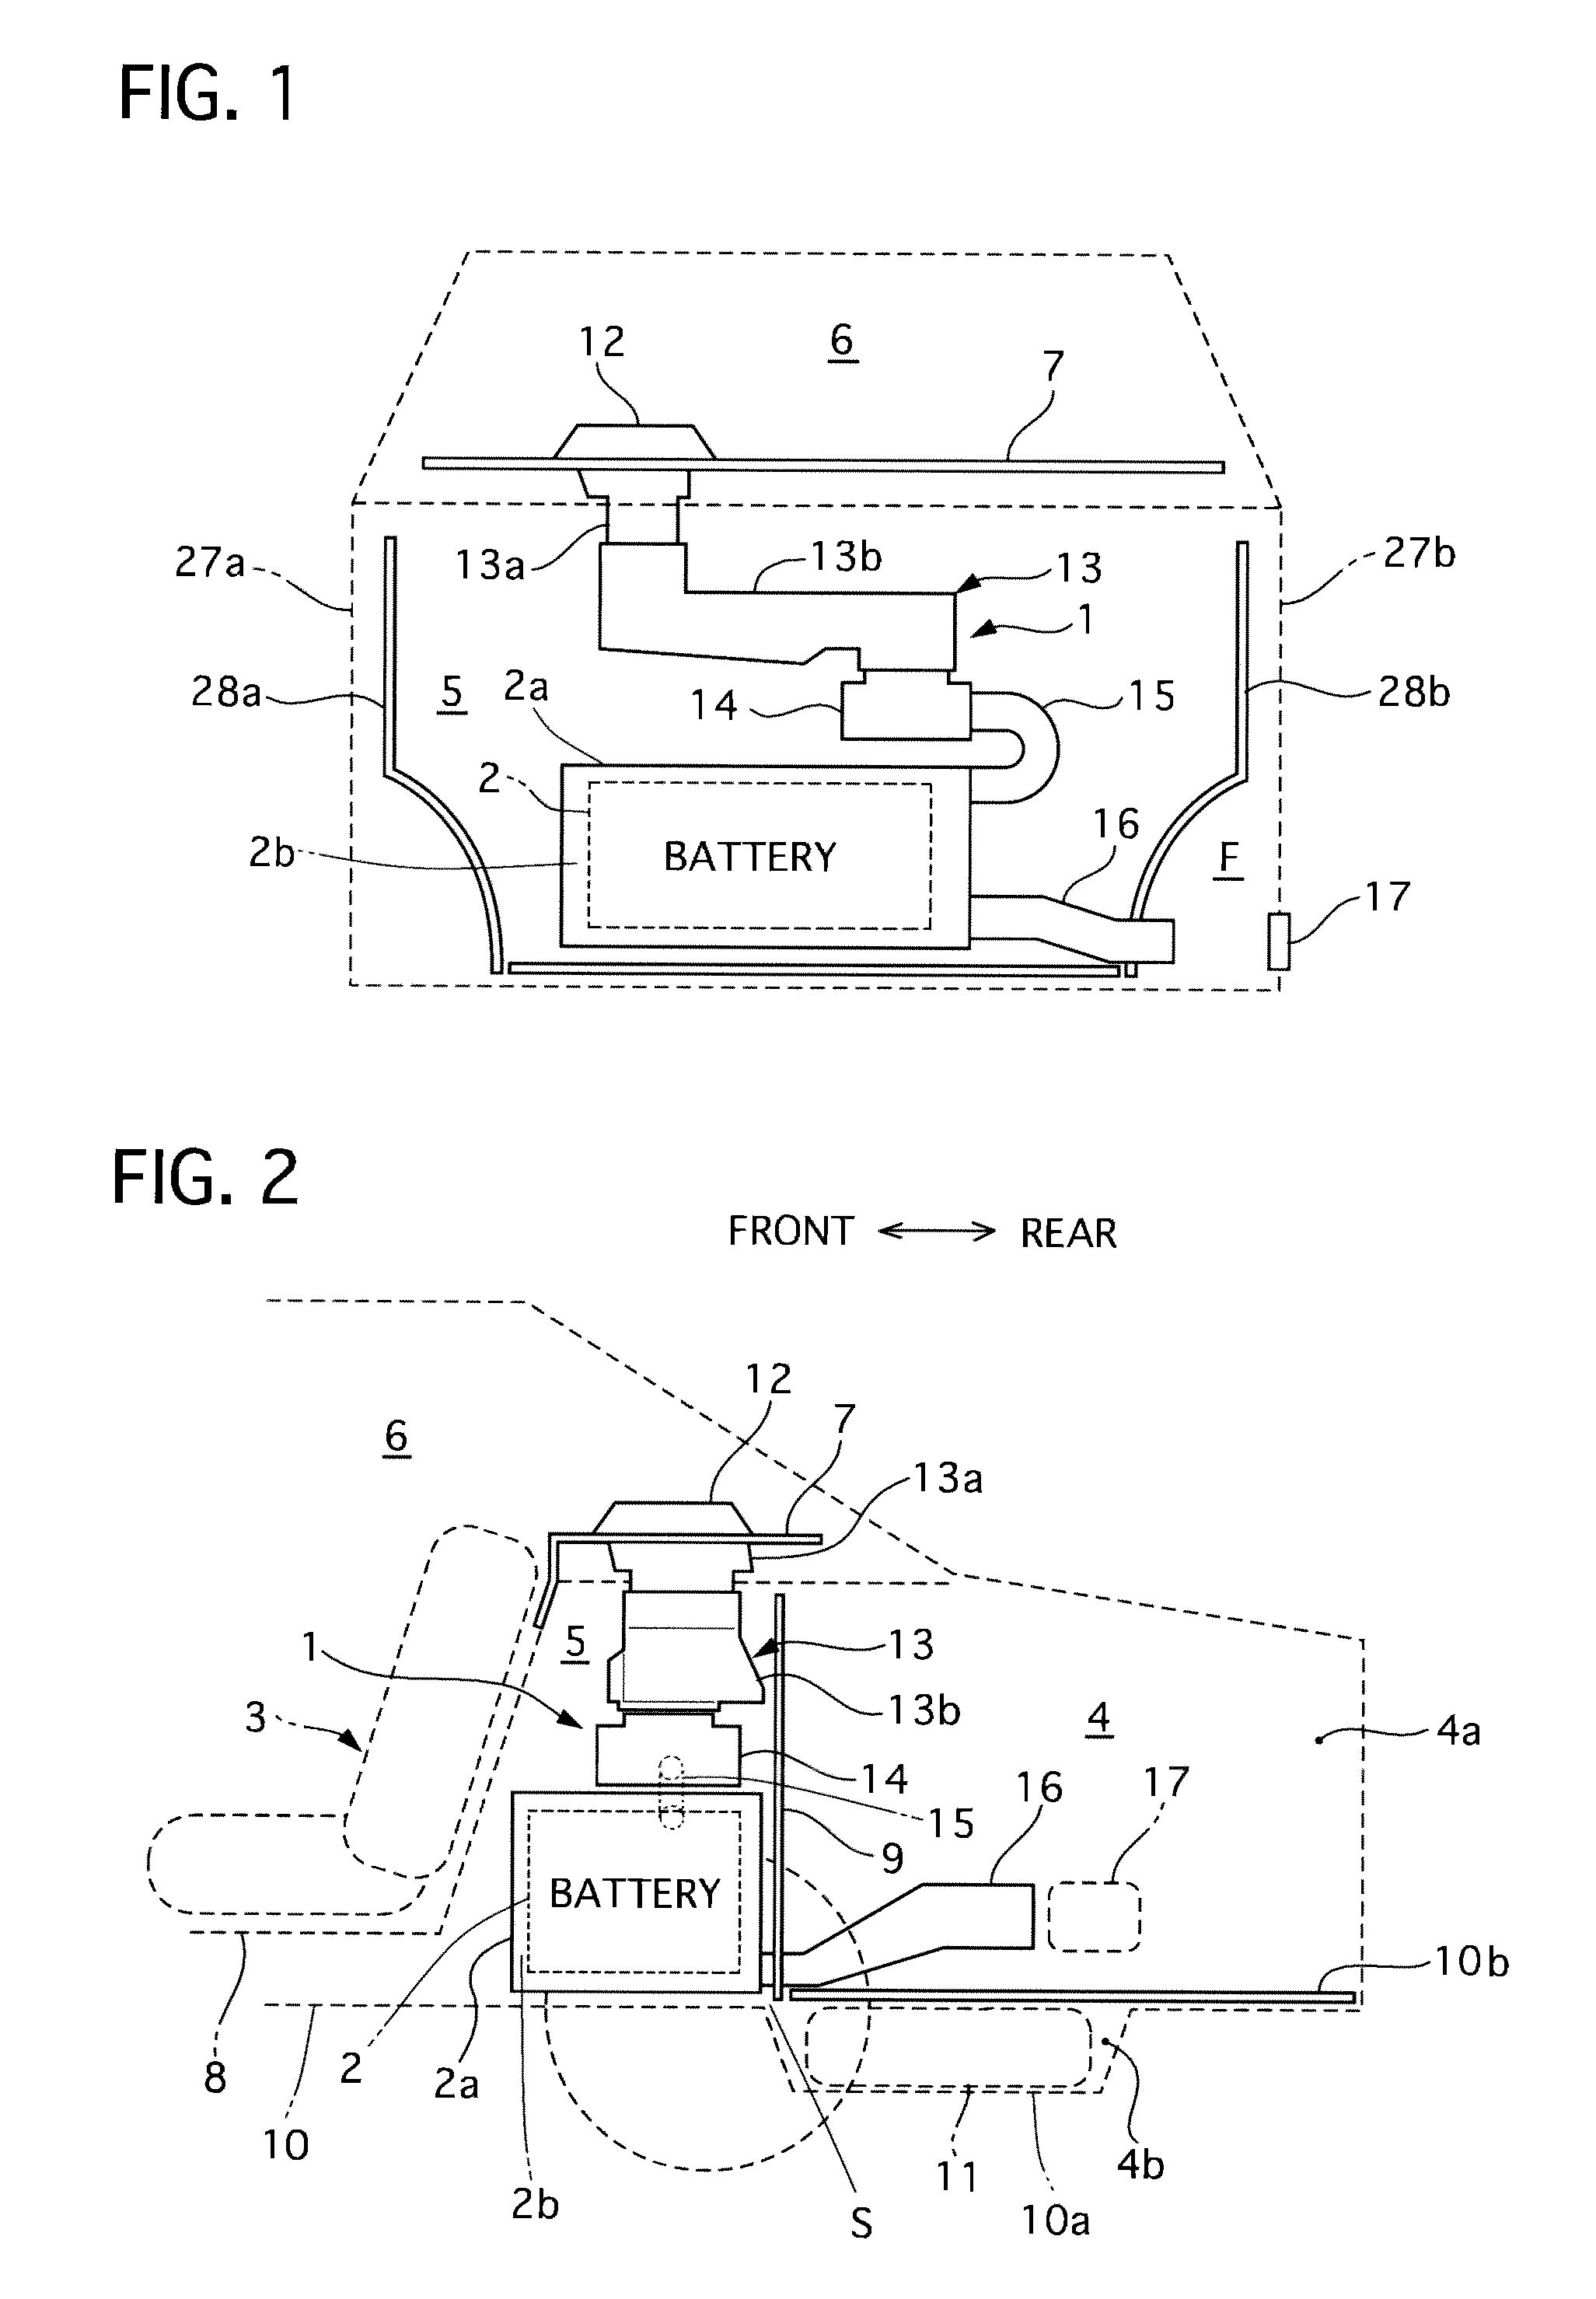 Structure for cooling heating element